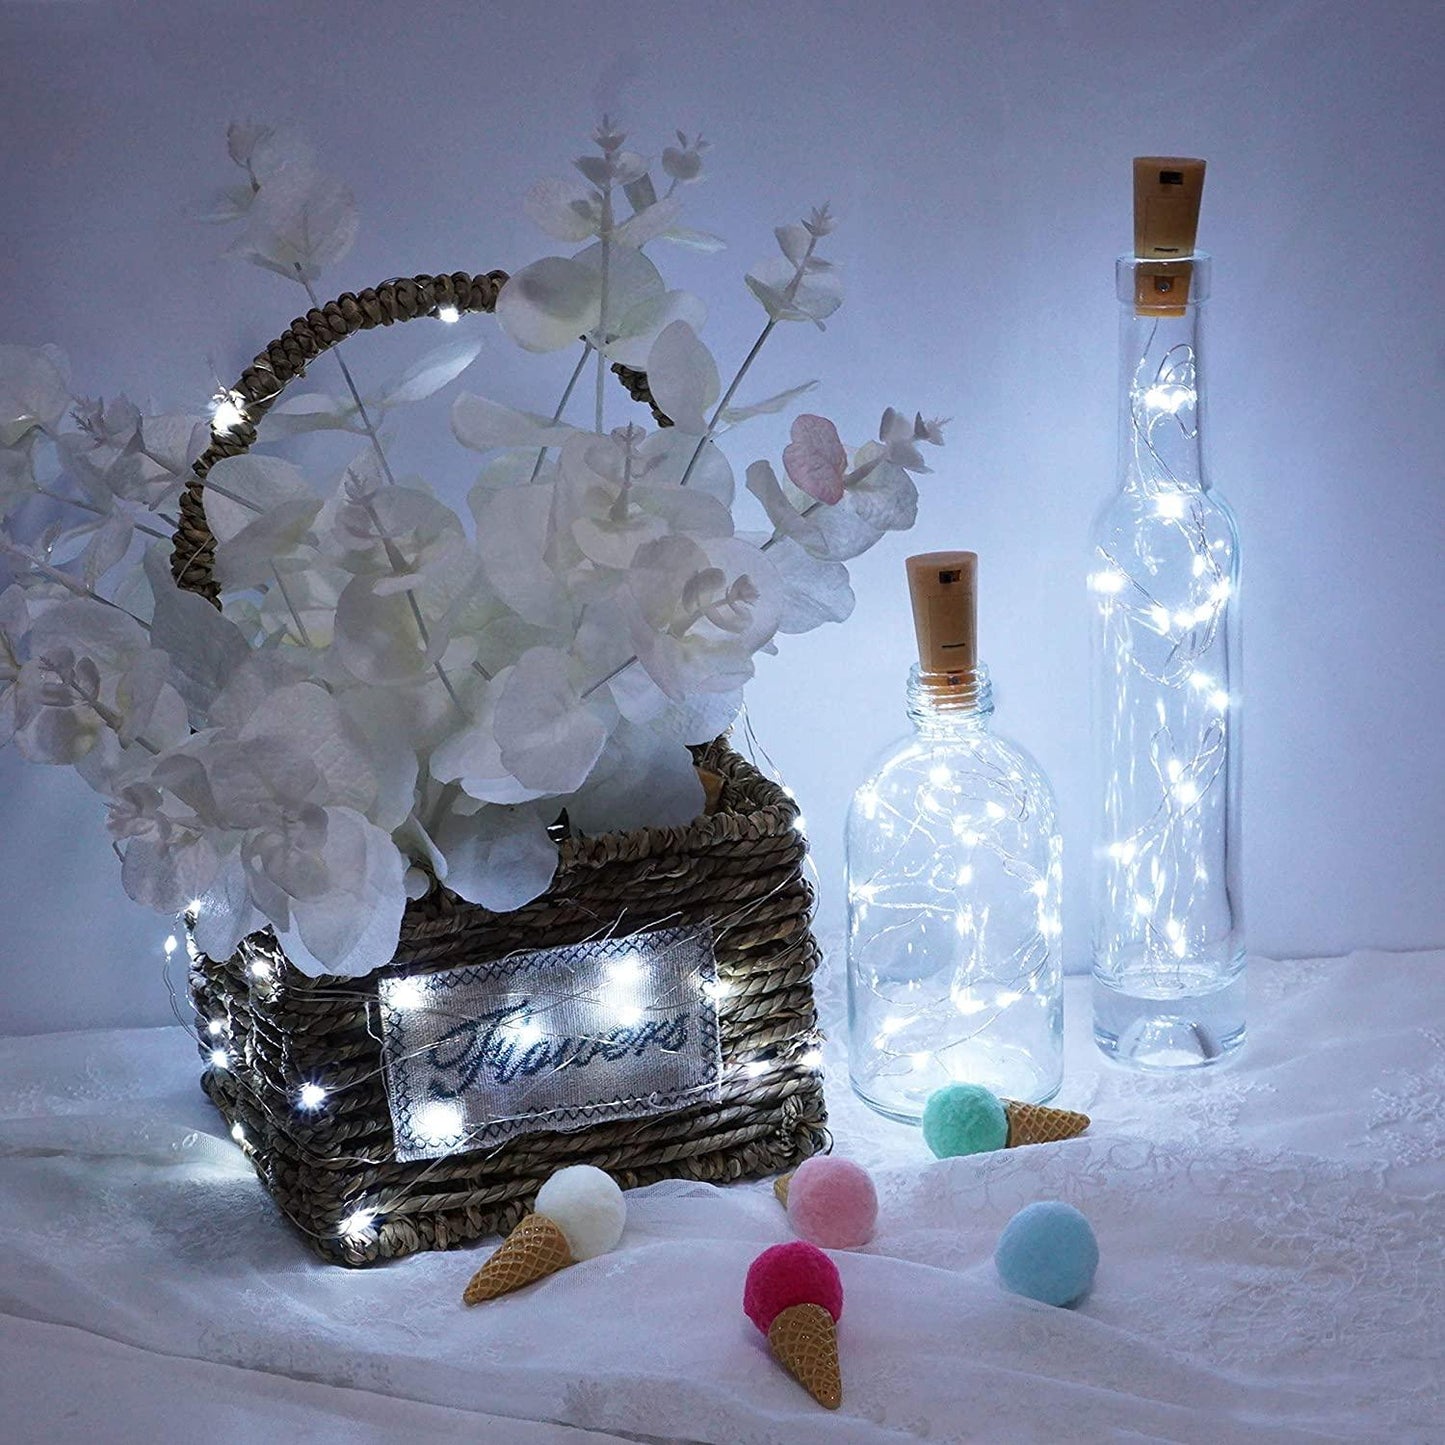 Battery Operated Cork String Lights for Wedding - If you say i do